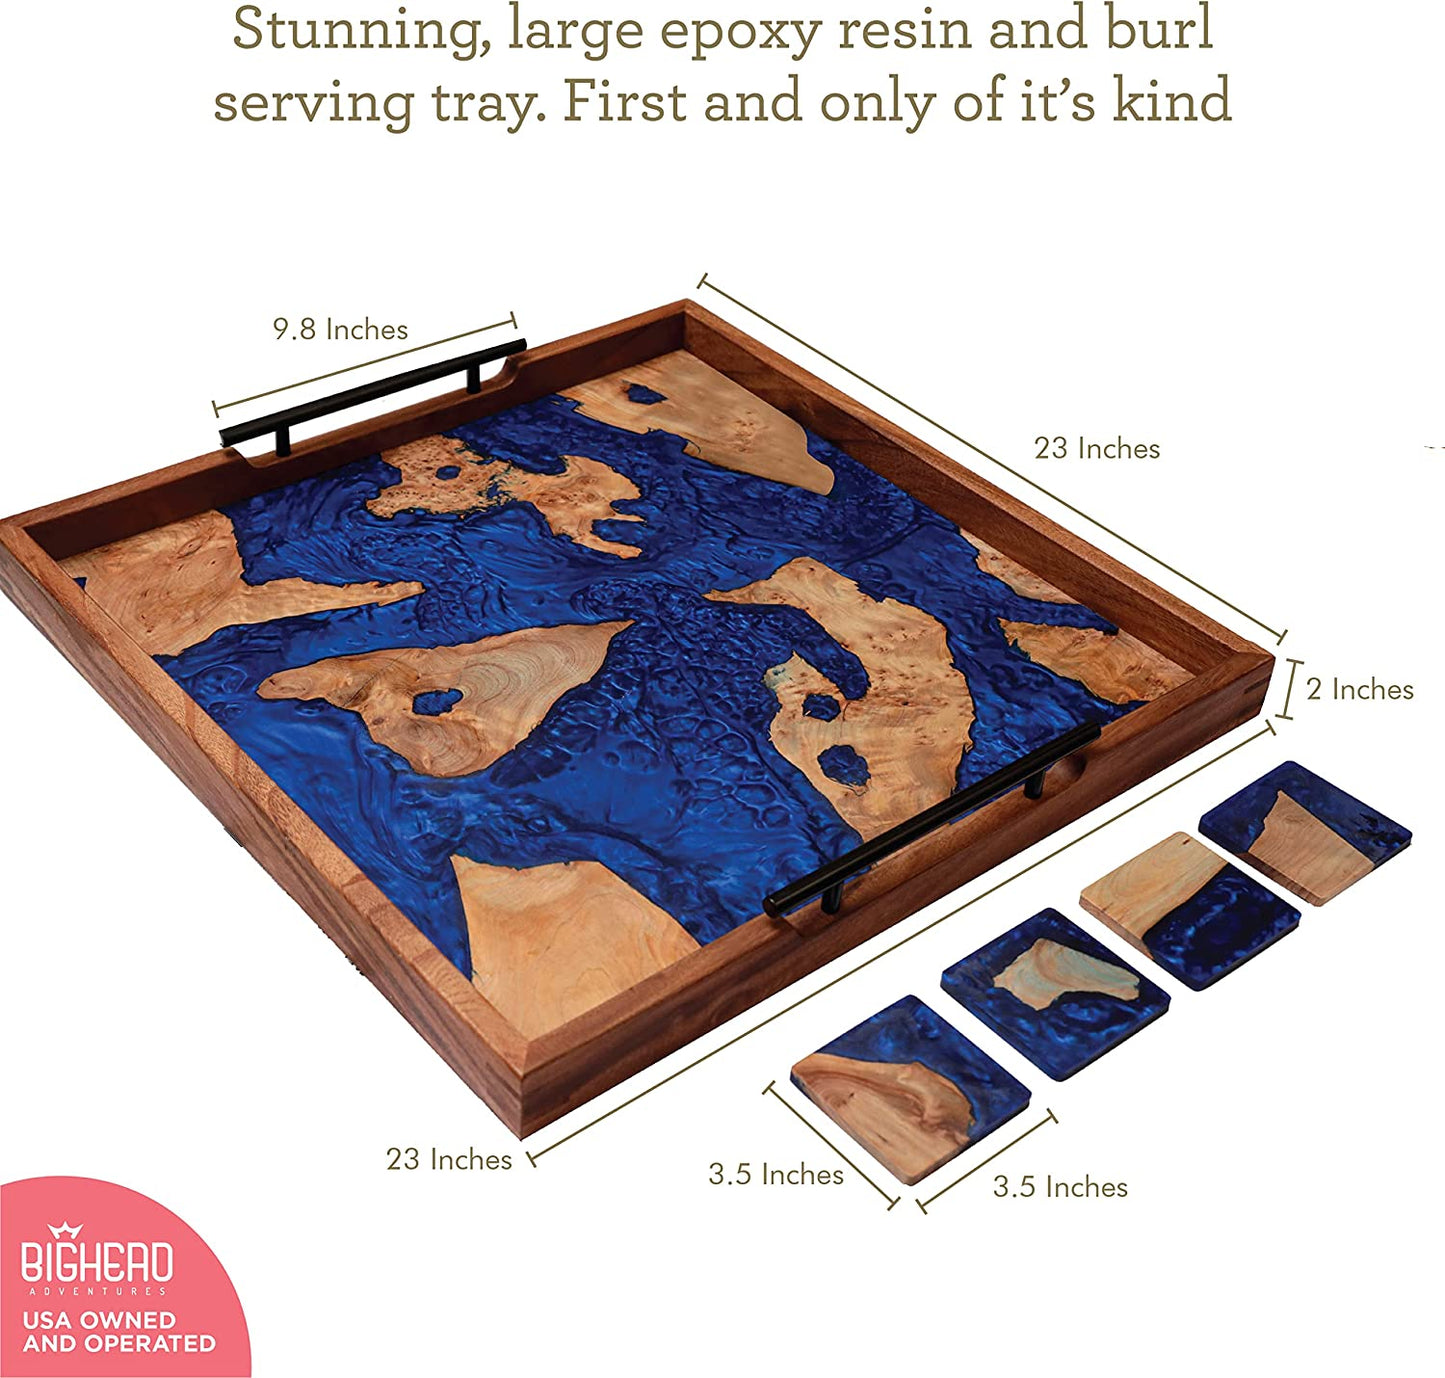 Bighead Epoxy Serving Tray Burl Tray with Epoxy Resin- Large Sized Blue Epoxy Wooden Tray-Ocean Inspired Resin Serving Tray for Home Decor Coffee Tray-with 4 Coaster Set (Blue)